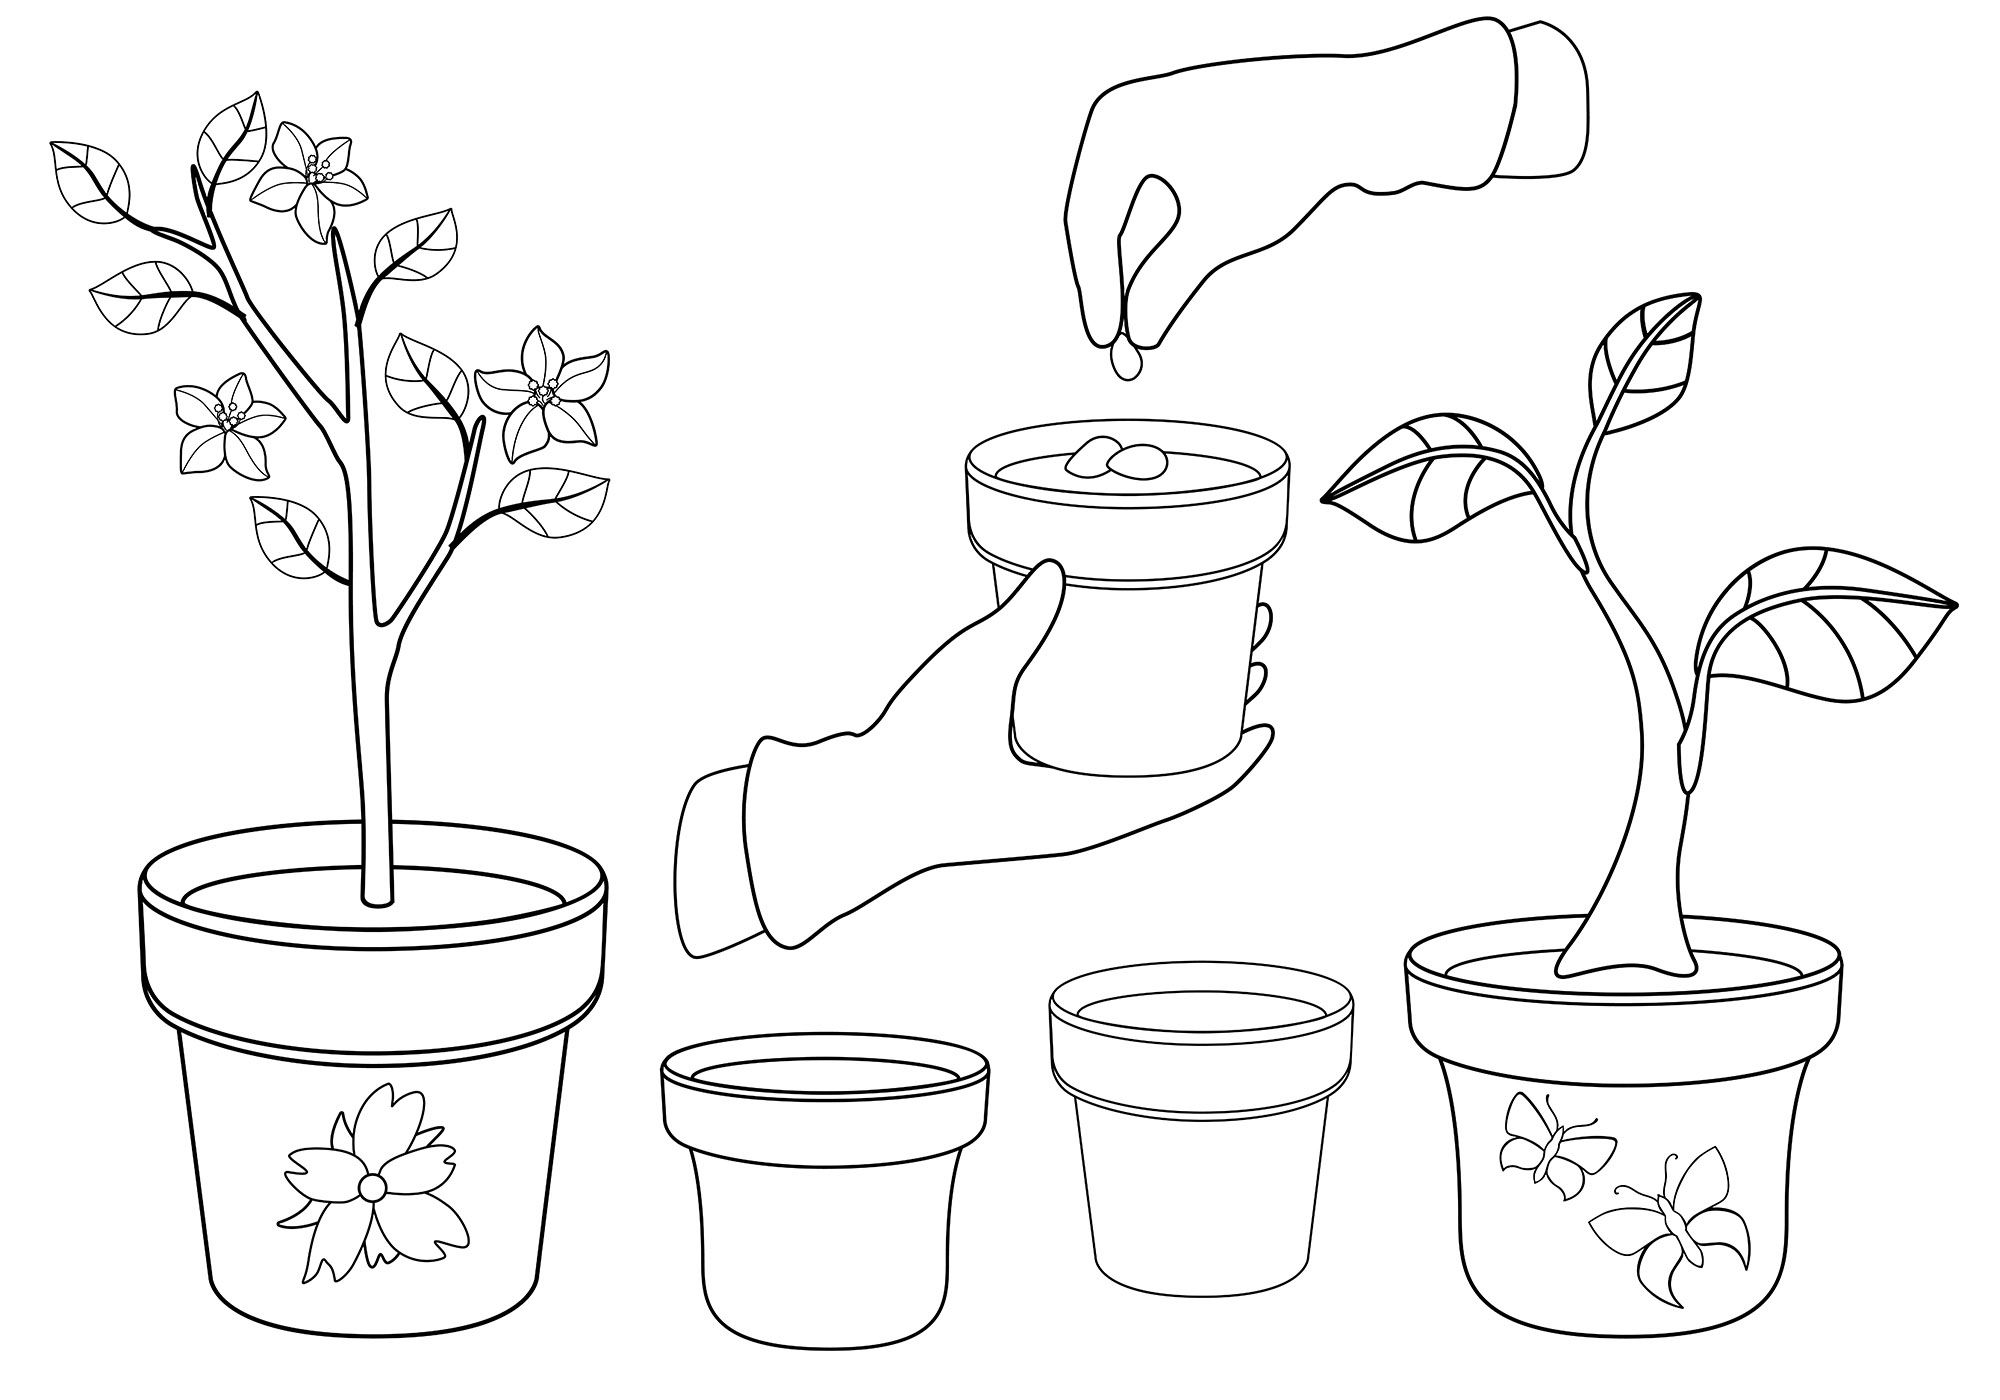 Drawing of a hand holding a potted plant.